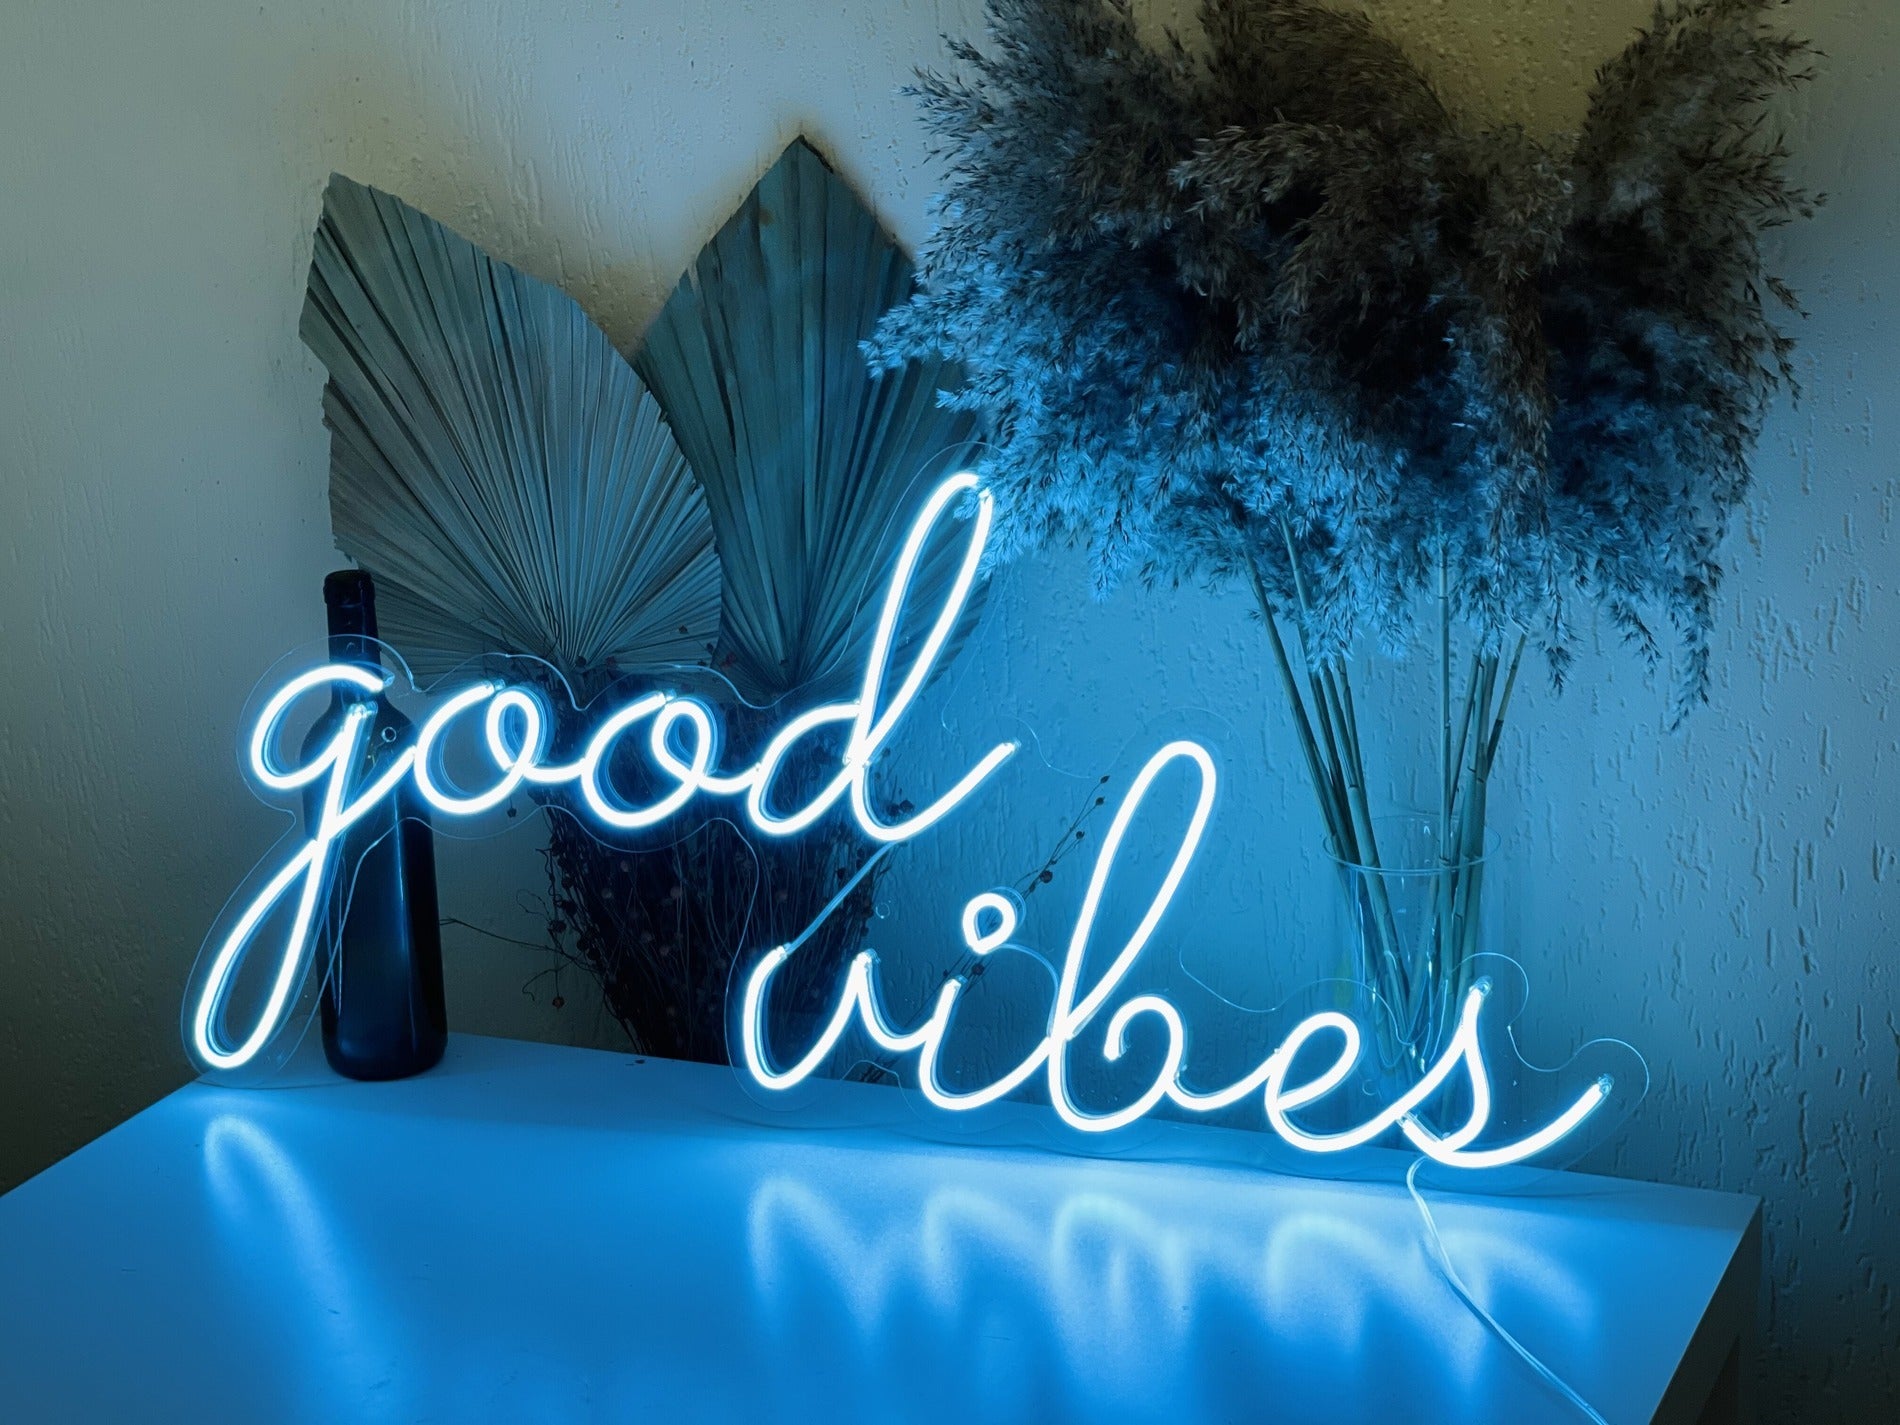 Cold blue tone "Good Vibes Only" neon sign